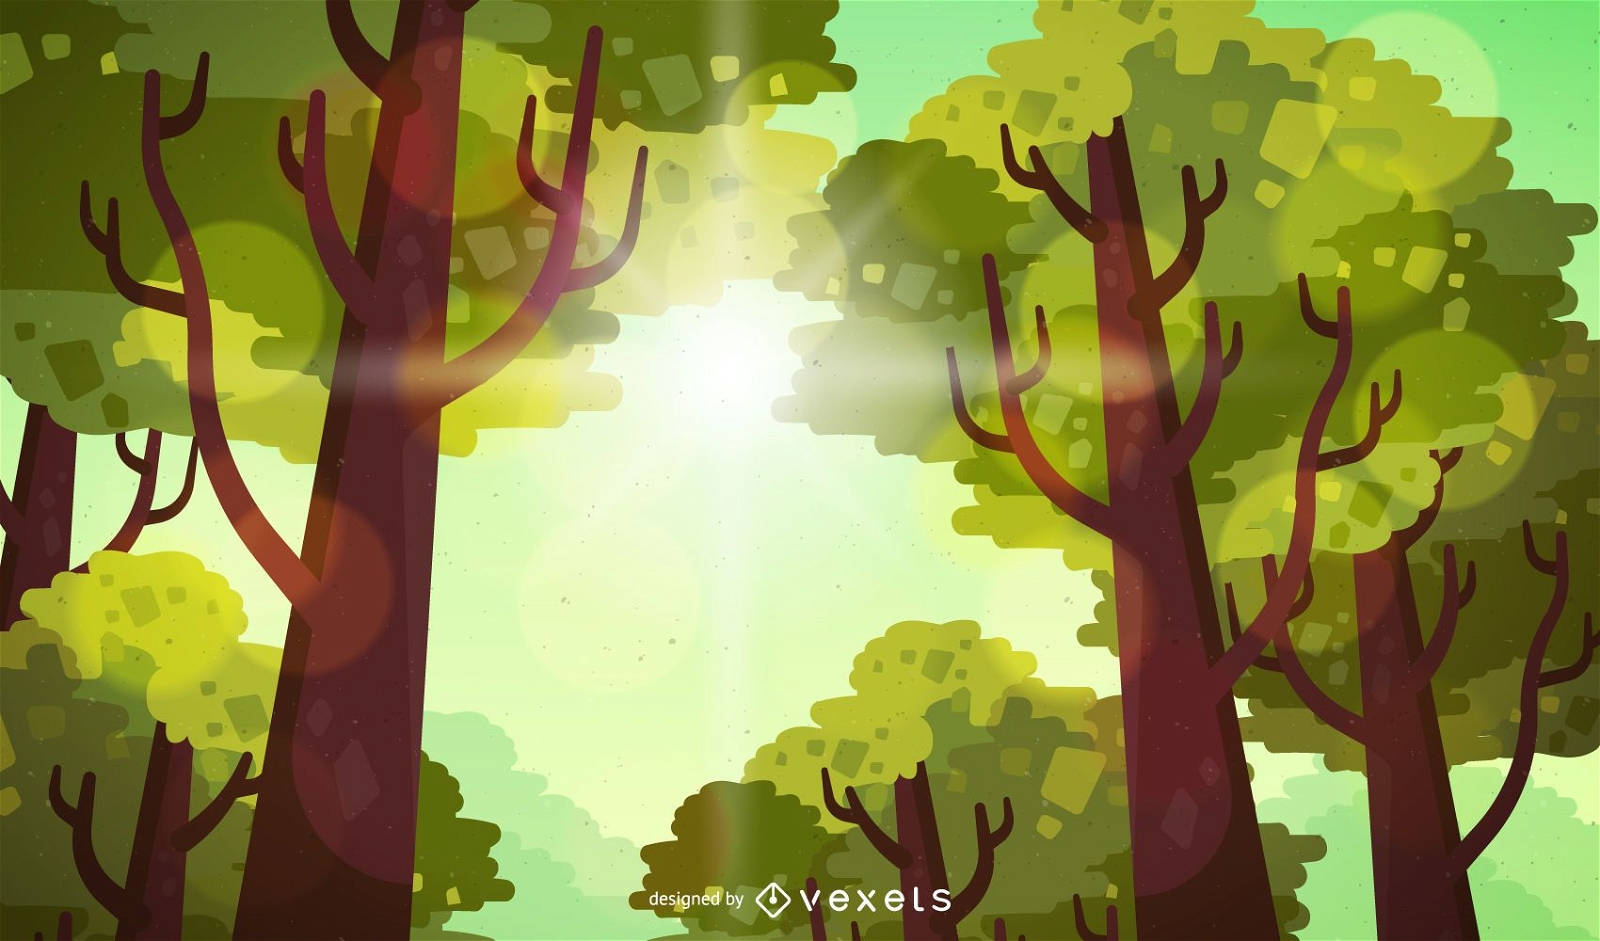 Flat forest illustration with sun